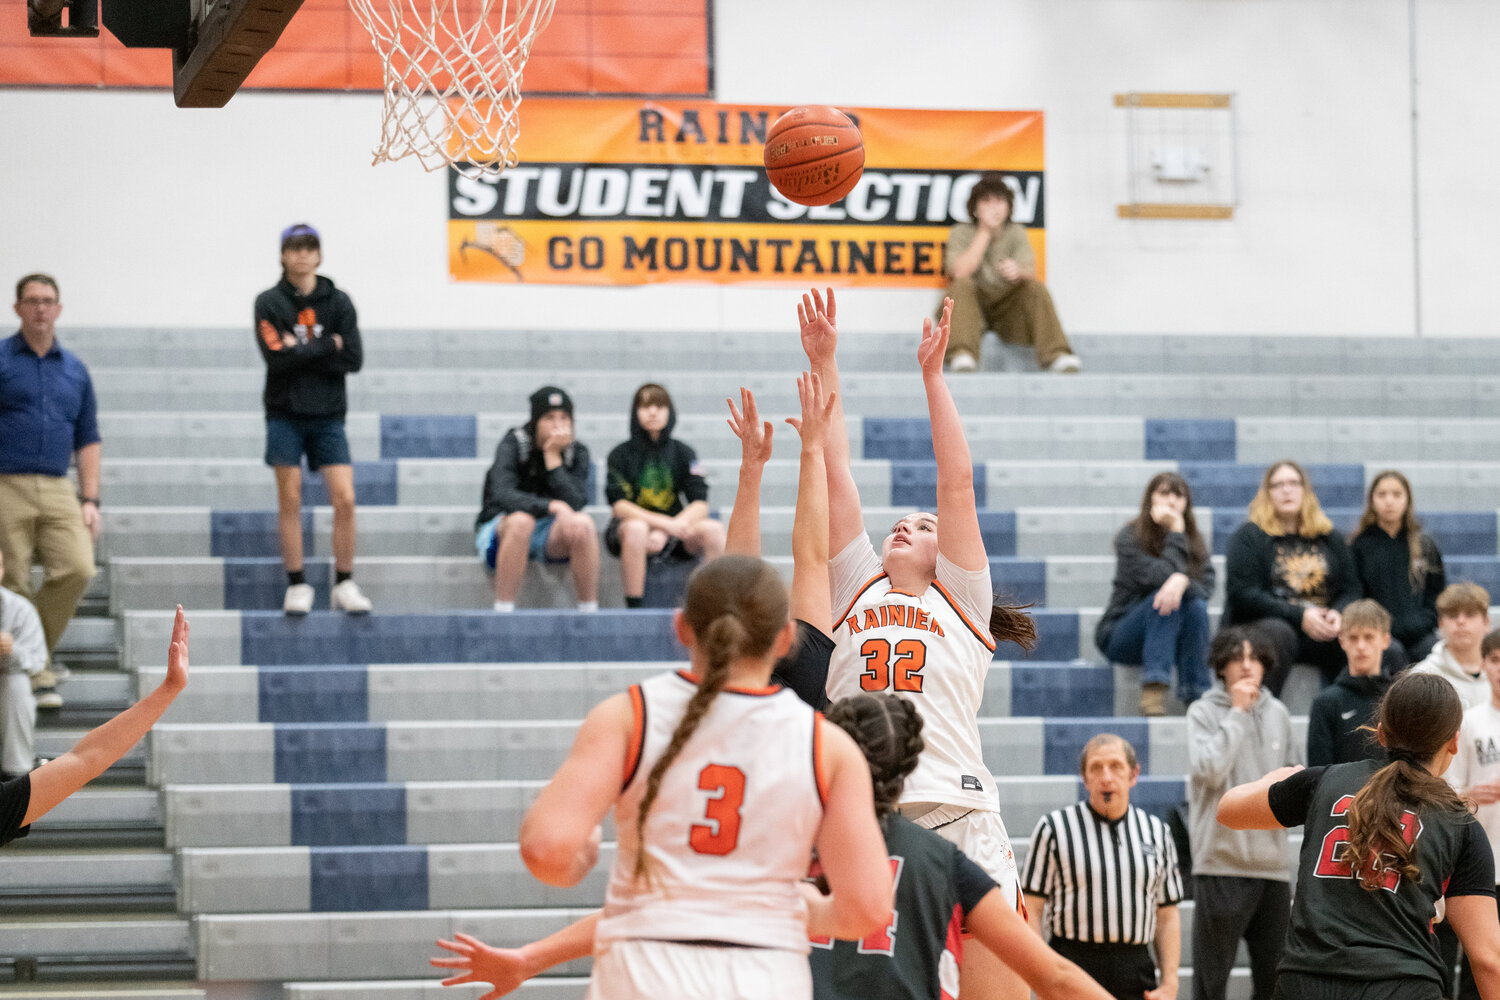 Haleigh Hanson shoots in the post during Rainier's 56-41 win over Neah Bay on Dec. 5.